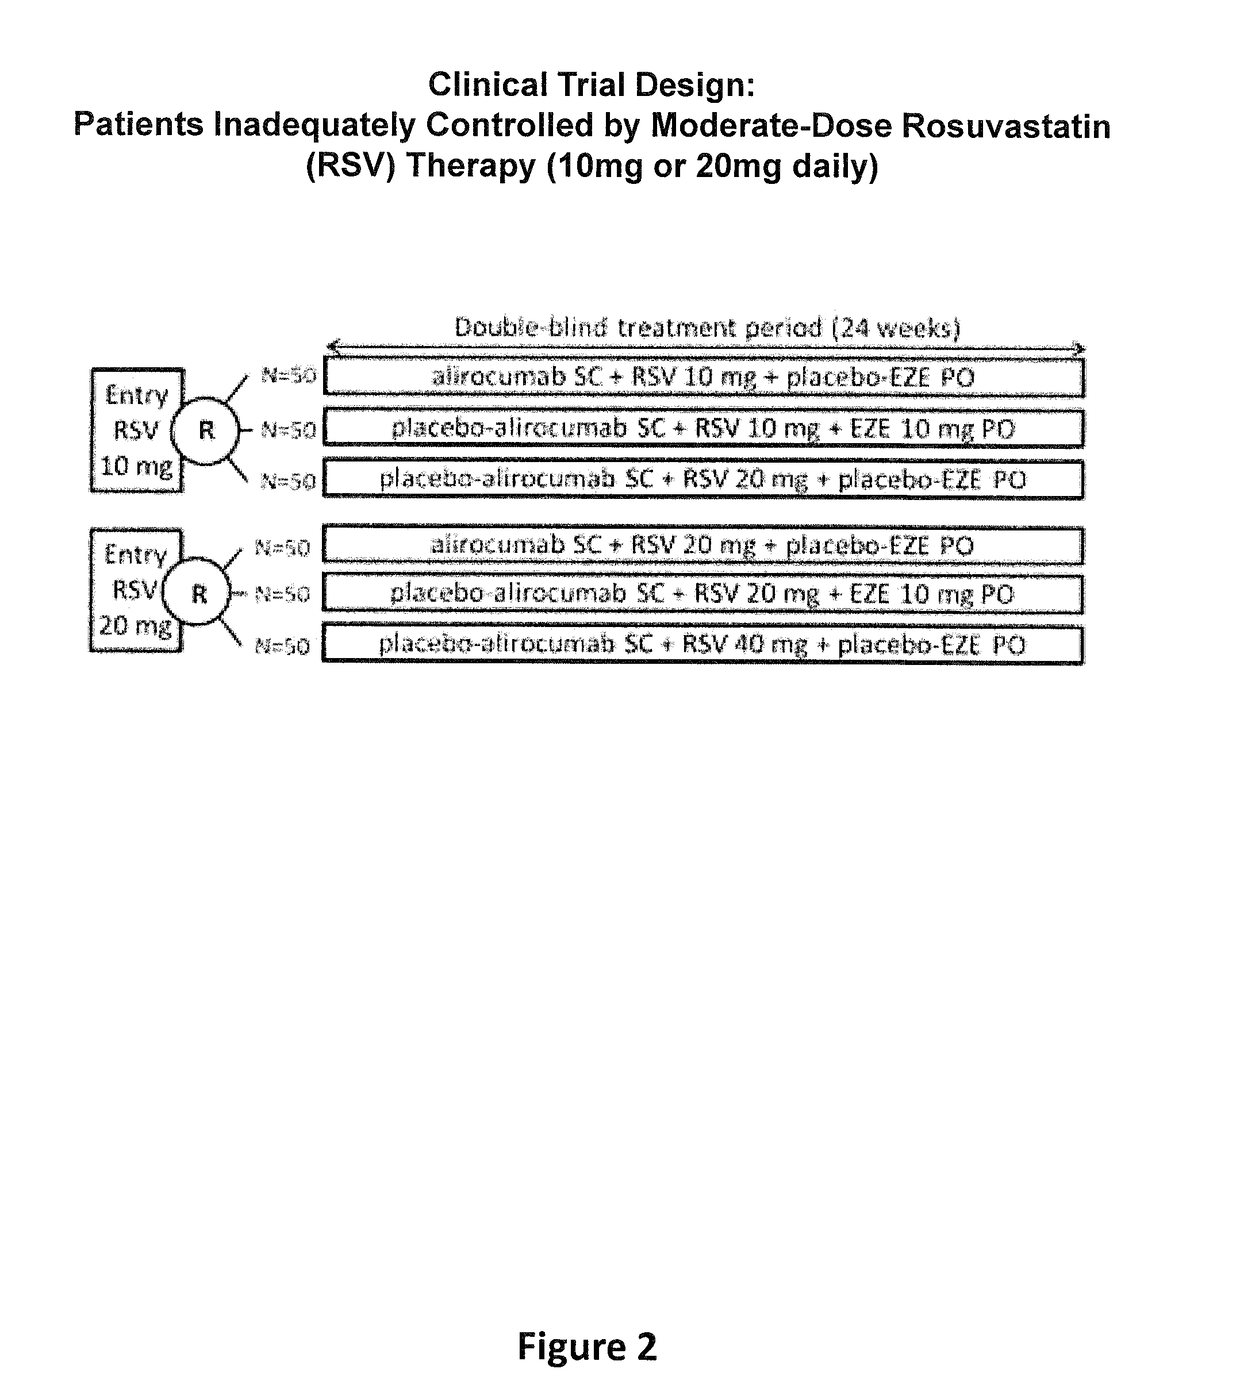 Methods for Treating Patients with Hypercholesterolemia that is not Adequately Controlled by Moderate-Dose Statin Therapy